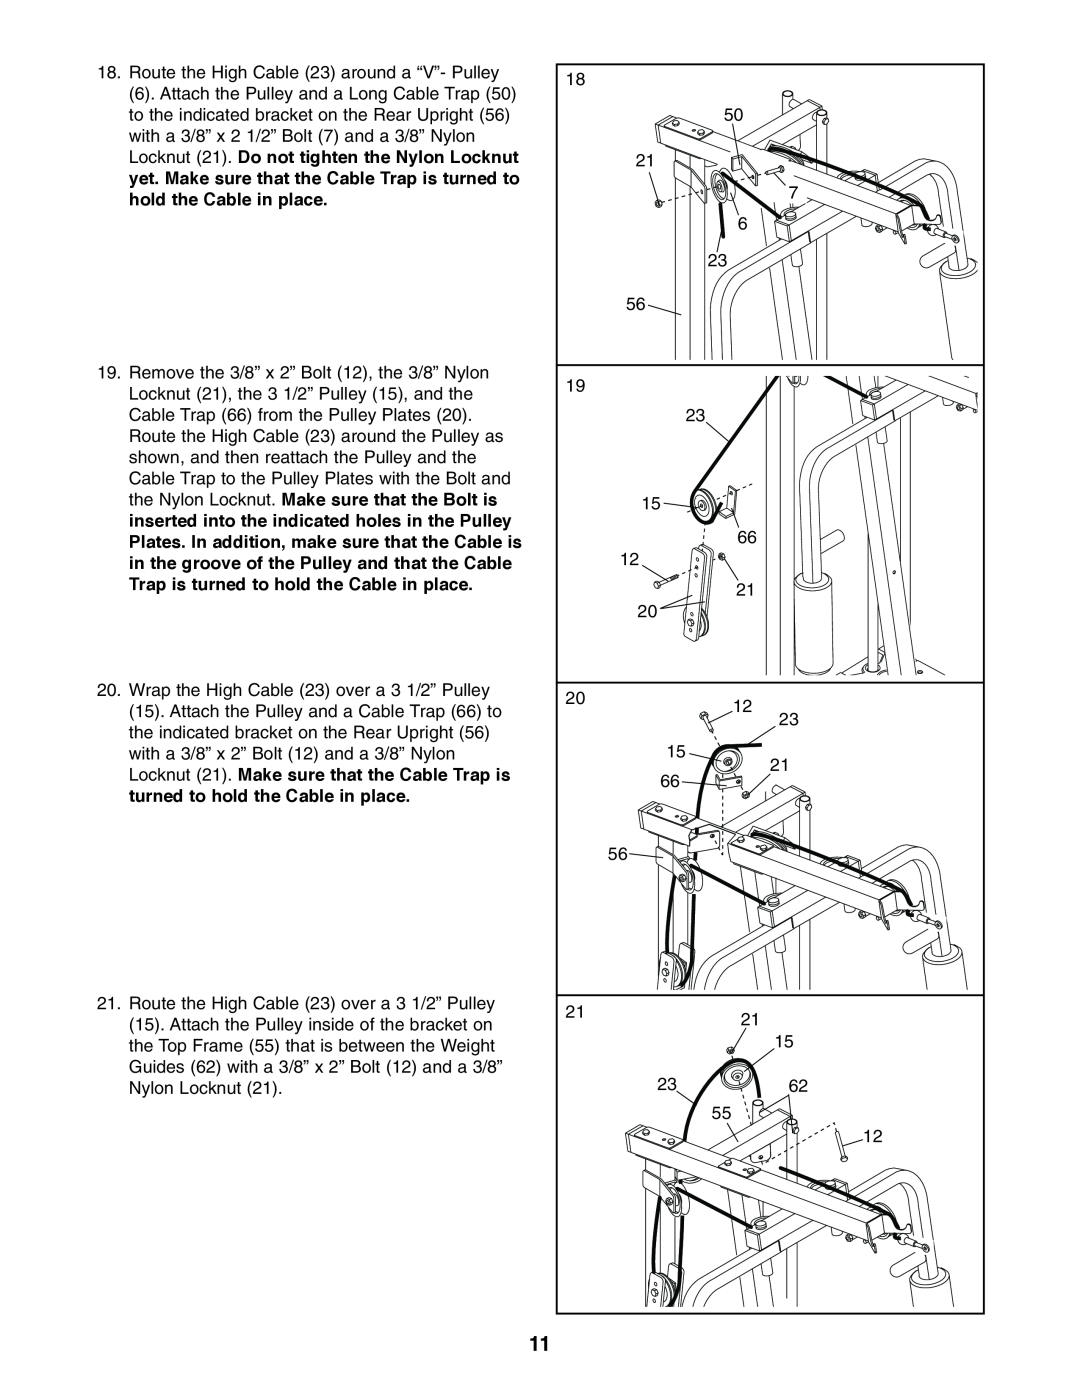 Weider WESY19610 user manual Route the High Cable 23 around a “V”- Pulley 